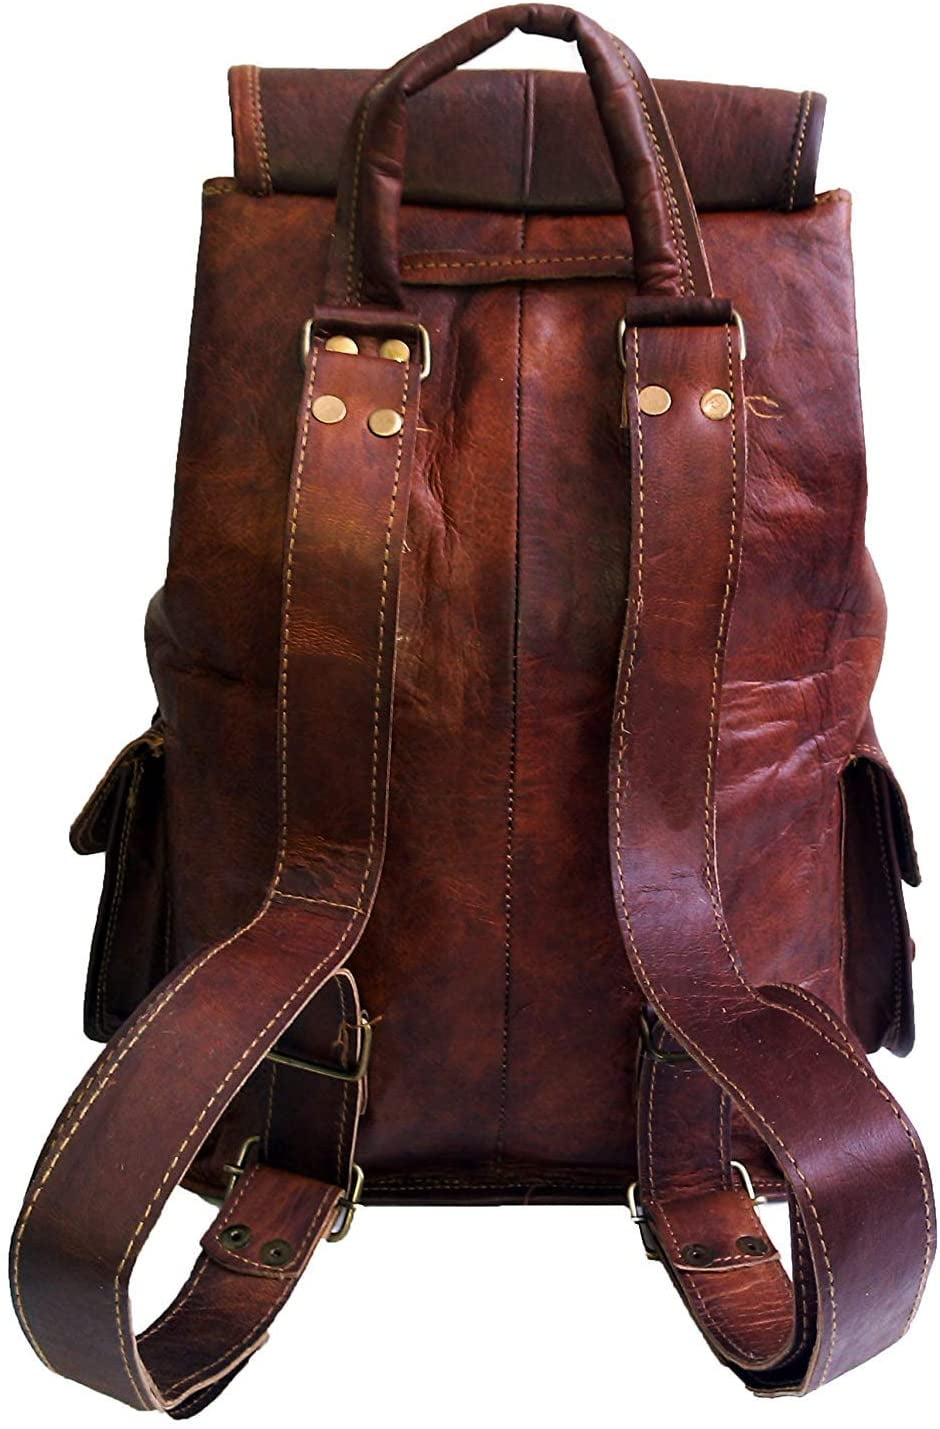 DHK 24 Genuine Leather Vintage Handmade Casual College Day-Pack Cross Body Messenger Laptop Backpack Travel Rucksack 